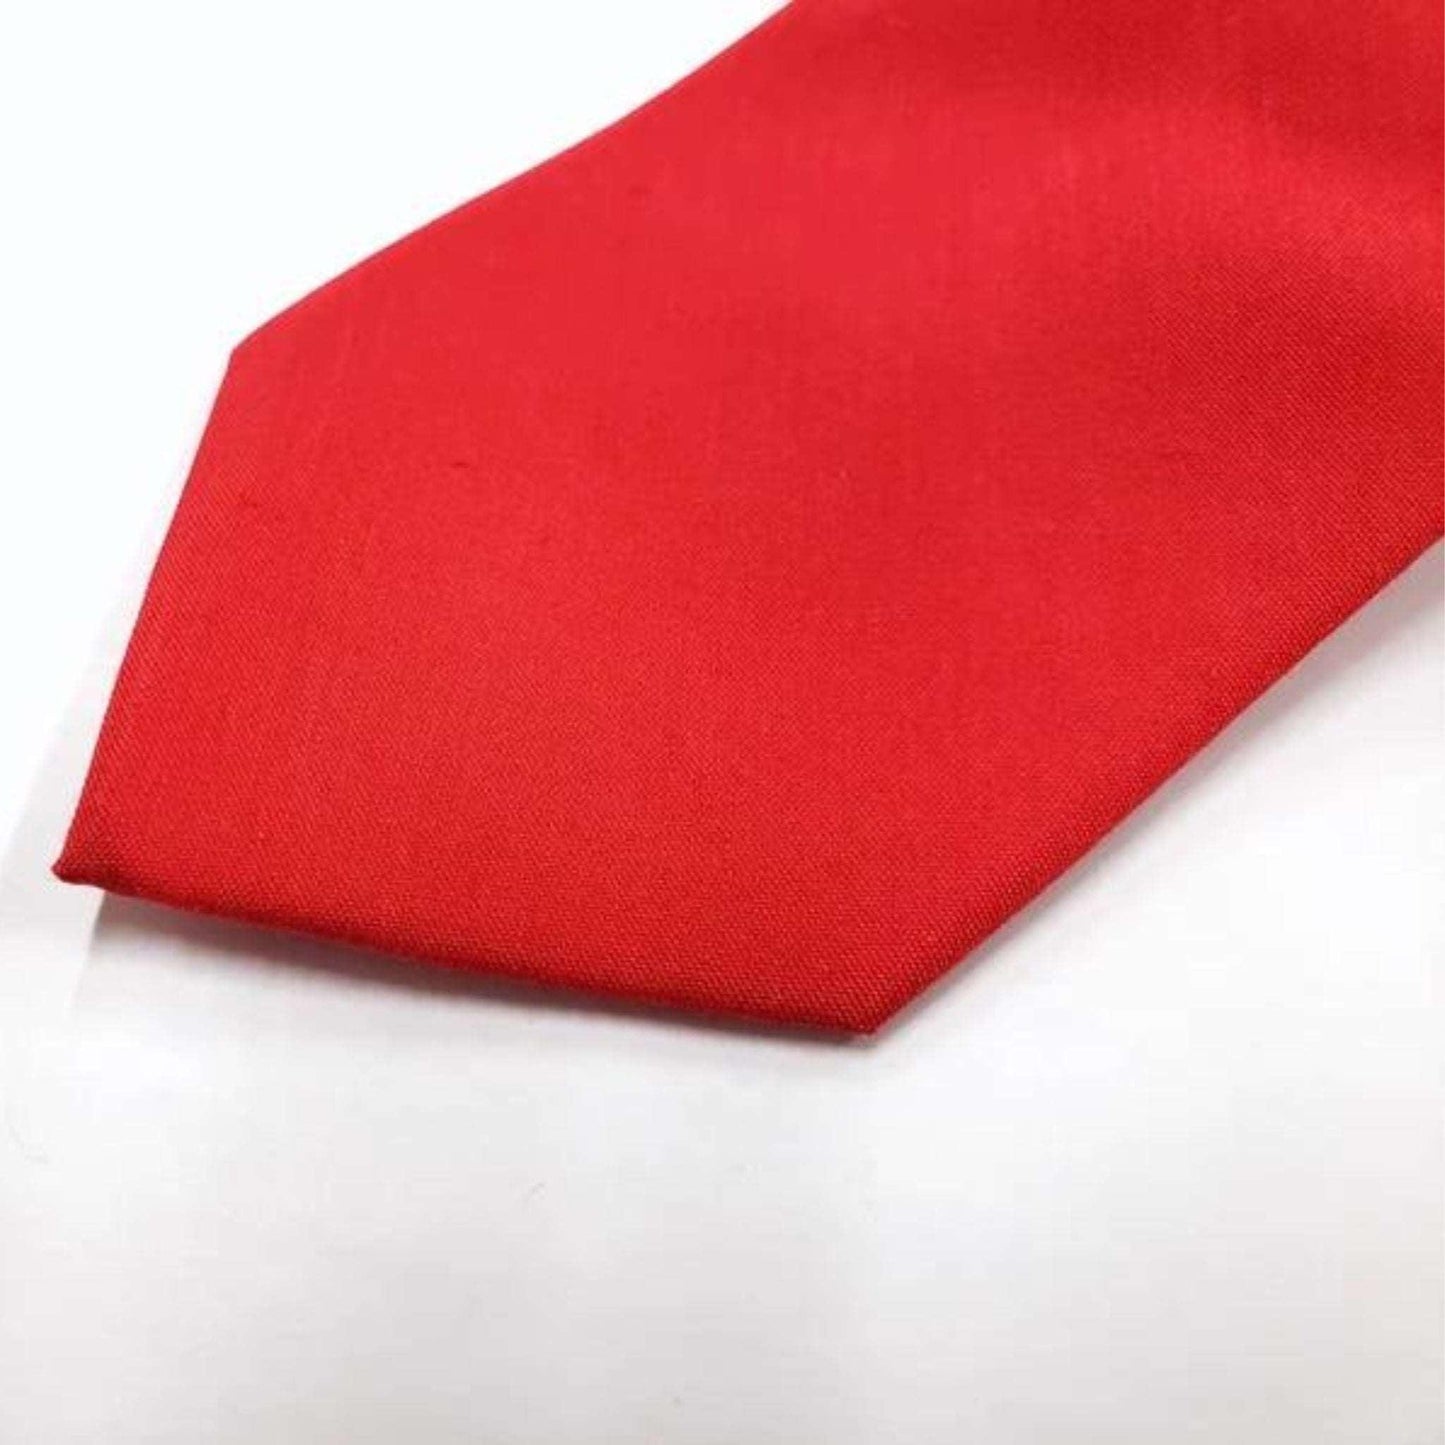 YOUTH ROBE Solid TIE (Red) - YOUTH ROBE